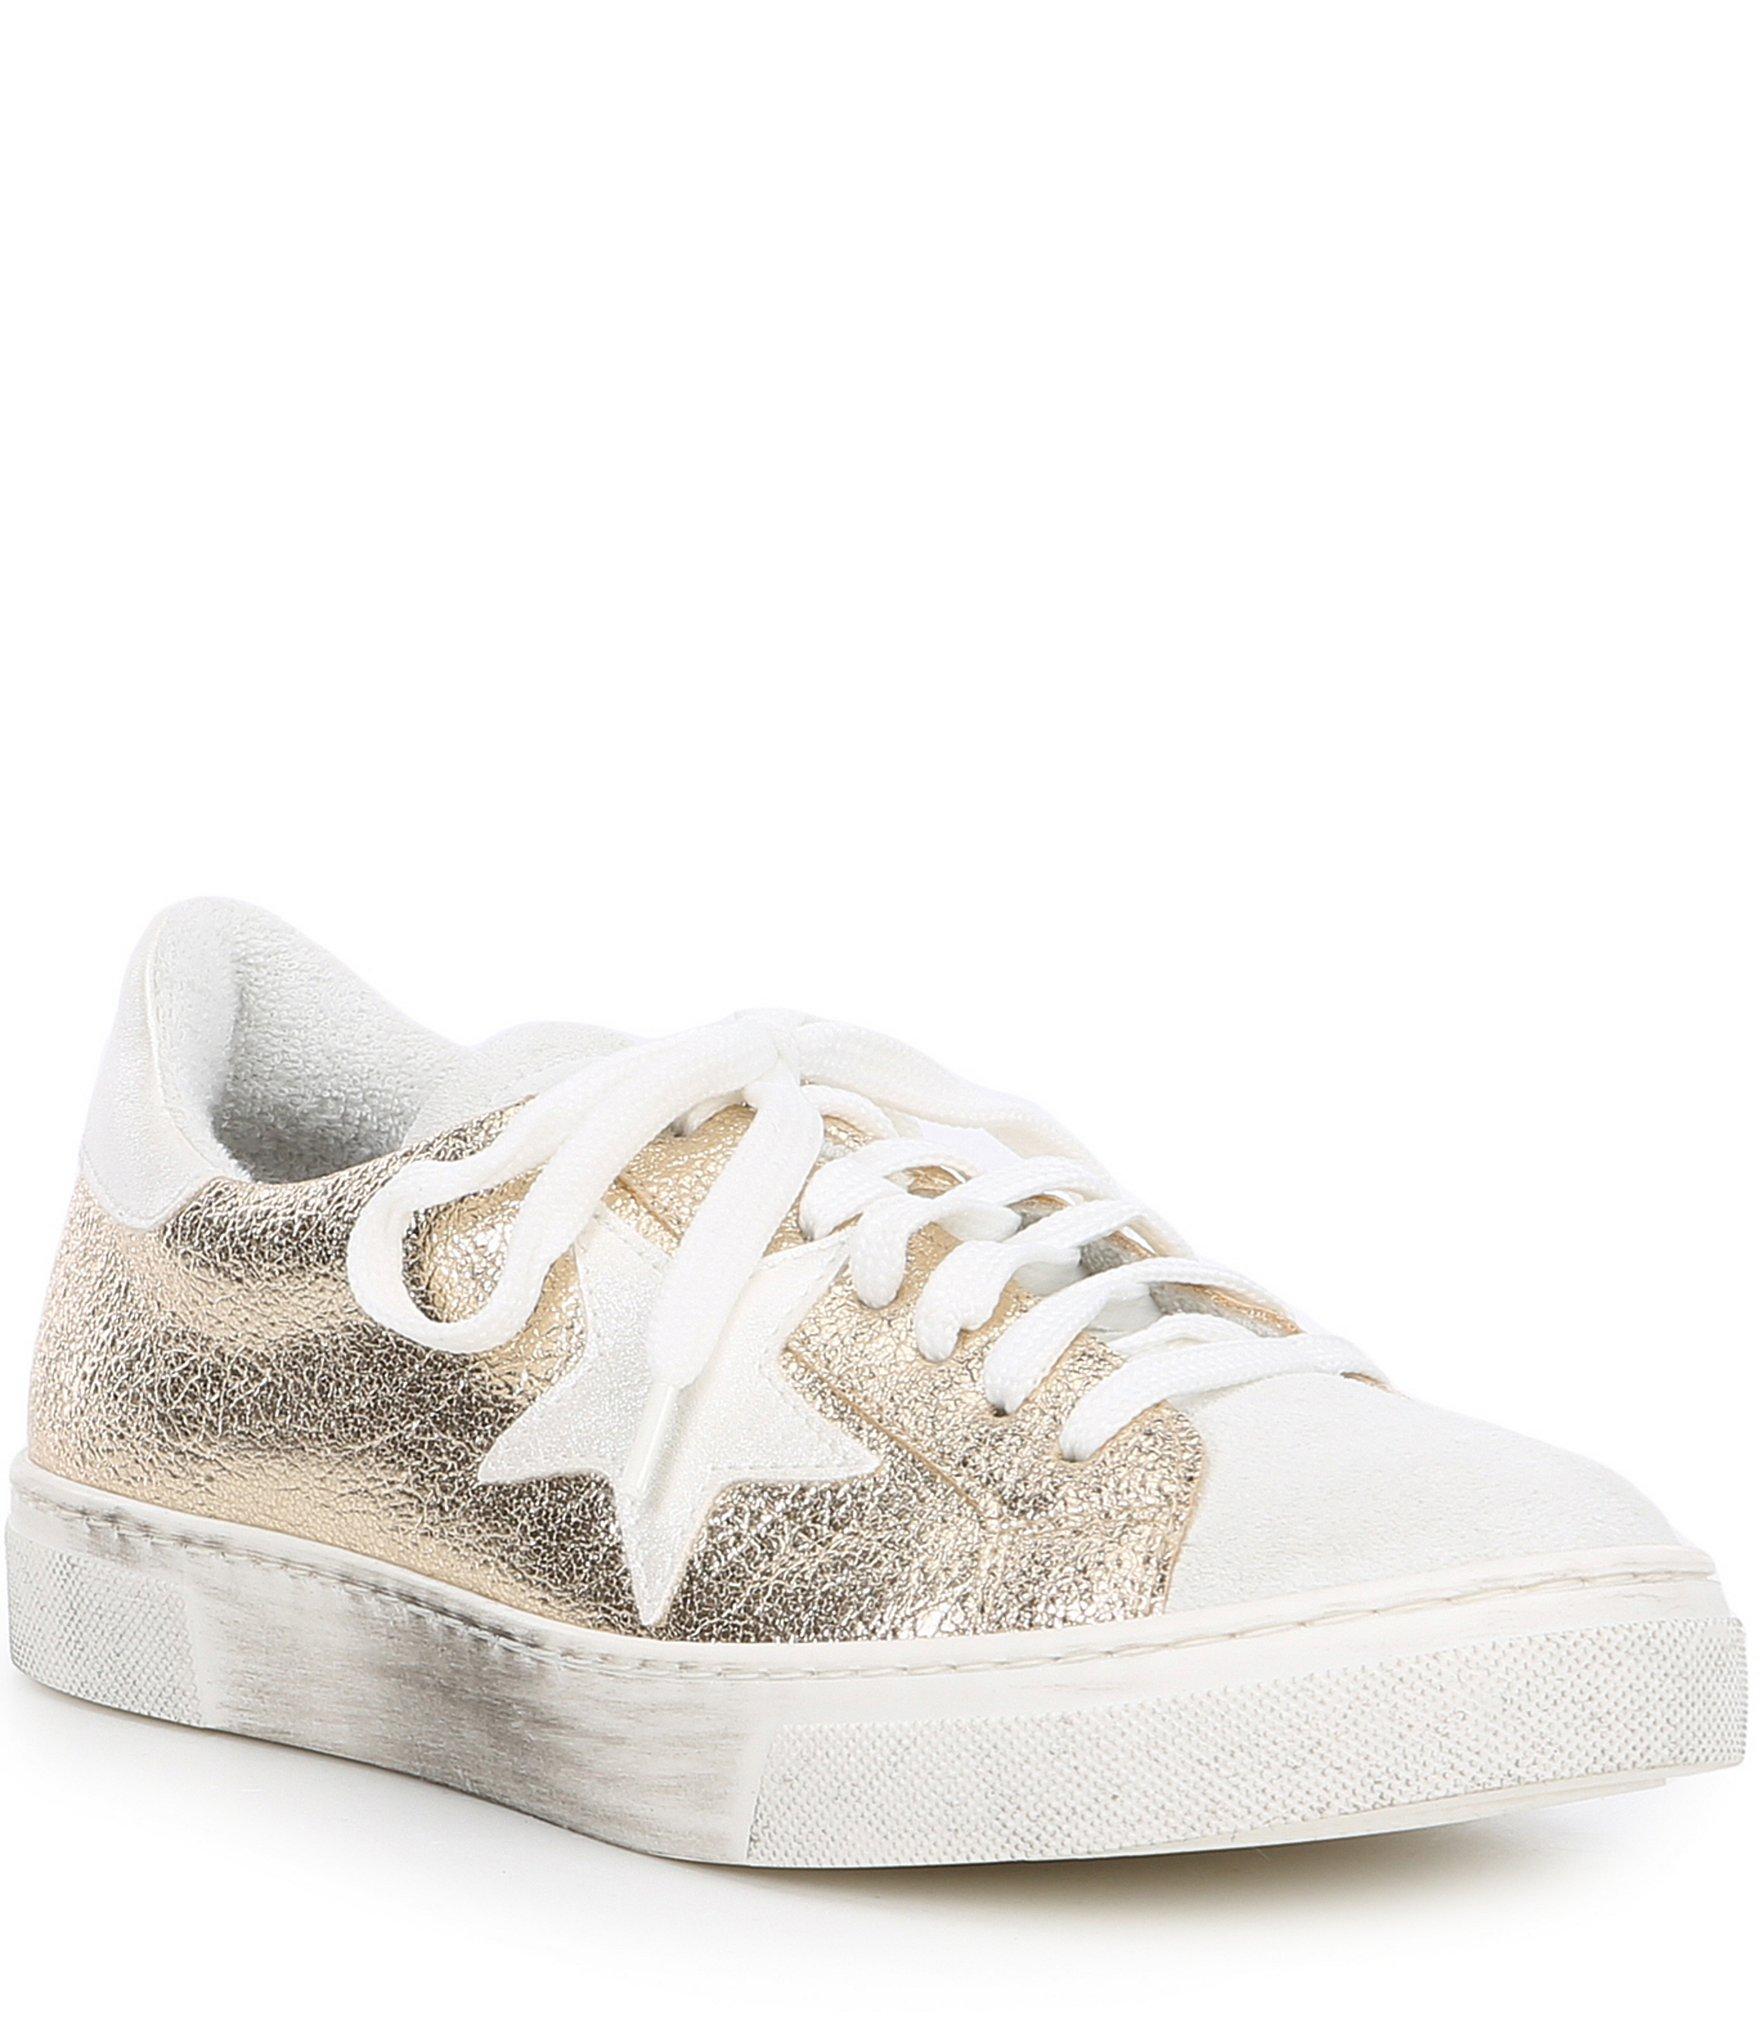 Steve Madden Steven By Rubie Metallic Leather & Suede Lace-up Sneakers ...